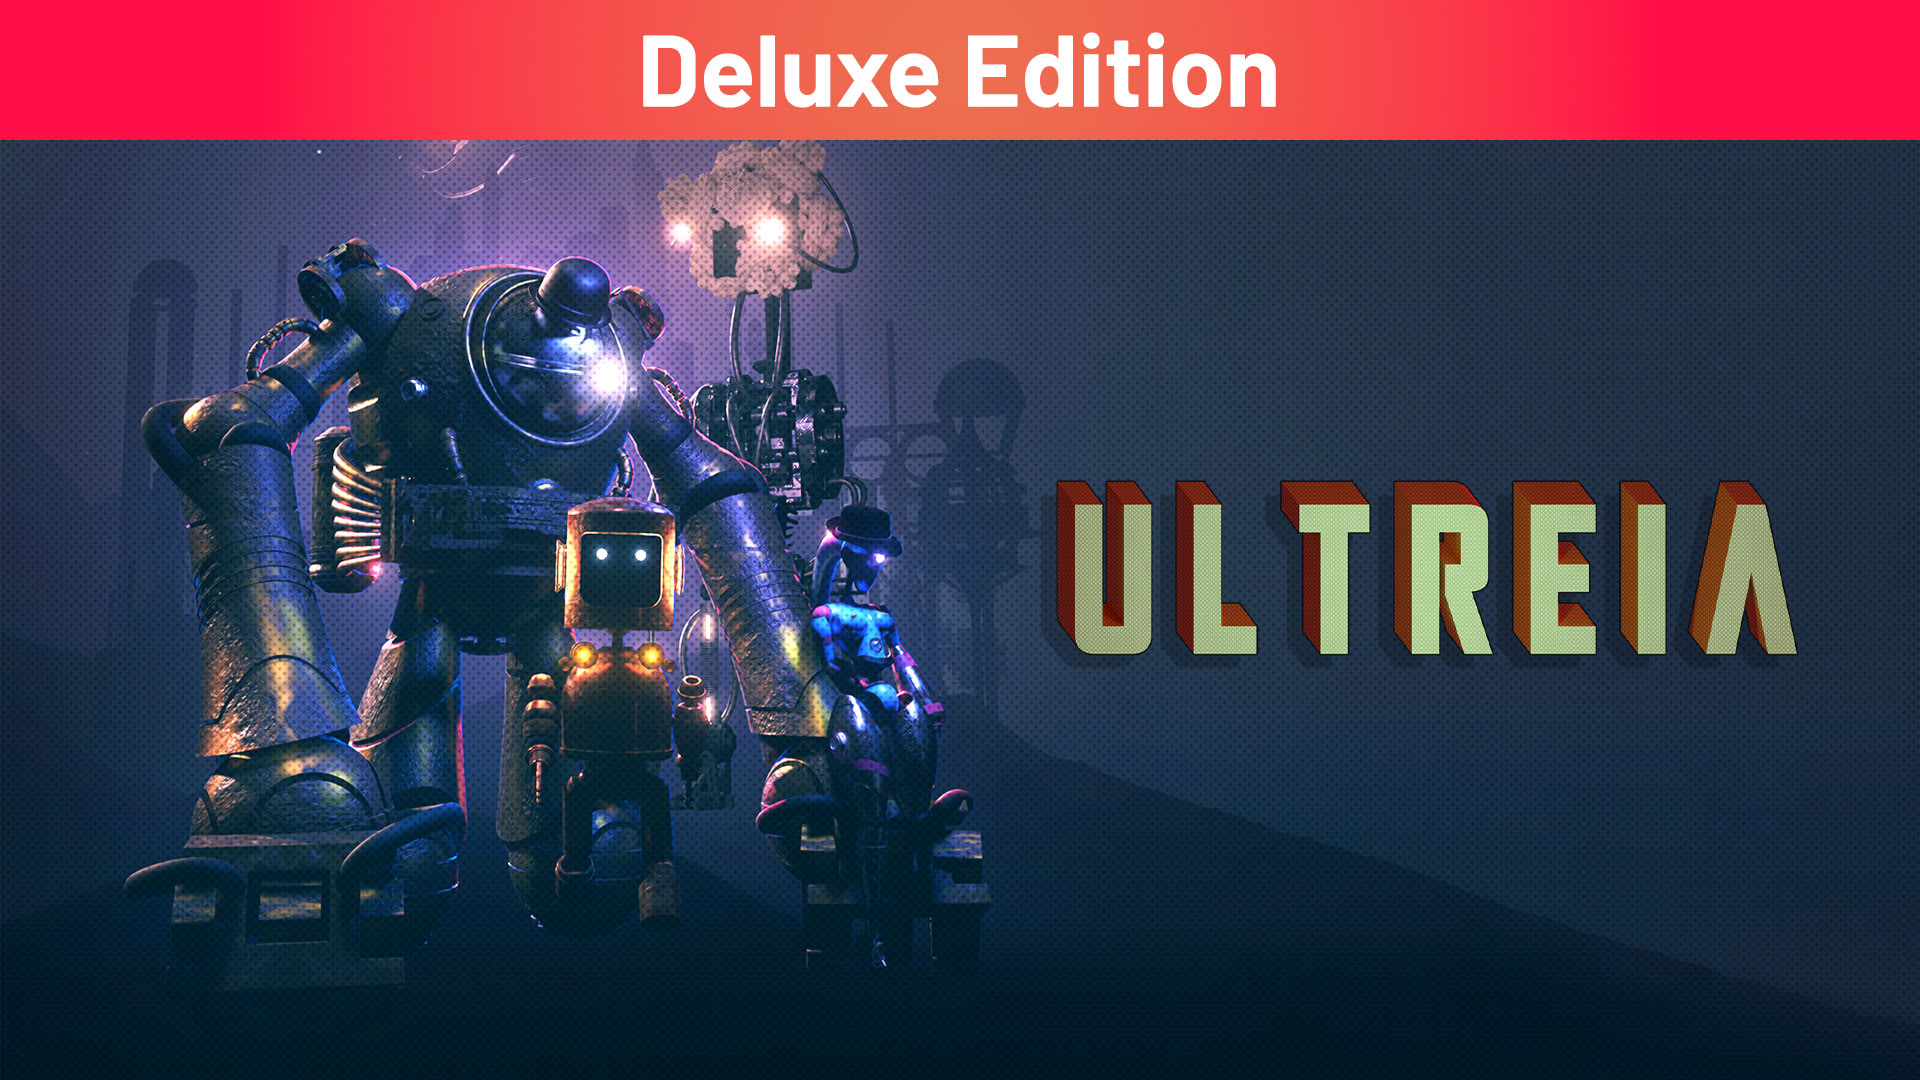 Ultreïa Deluxe Edition 1